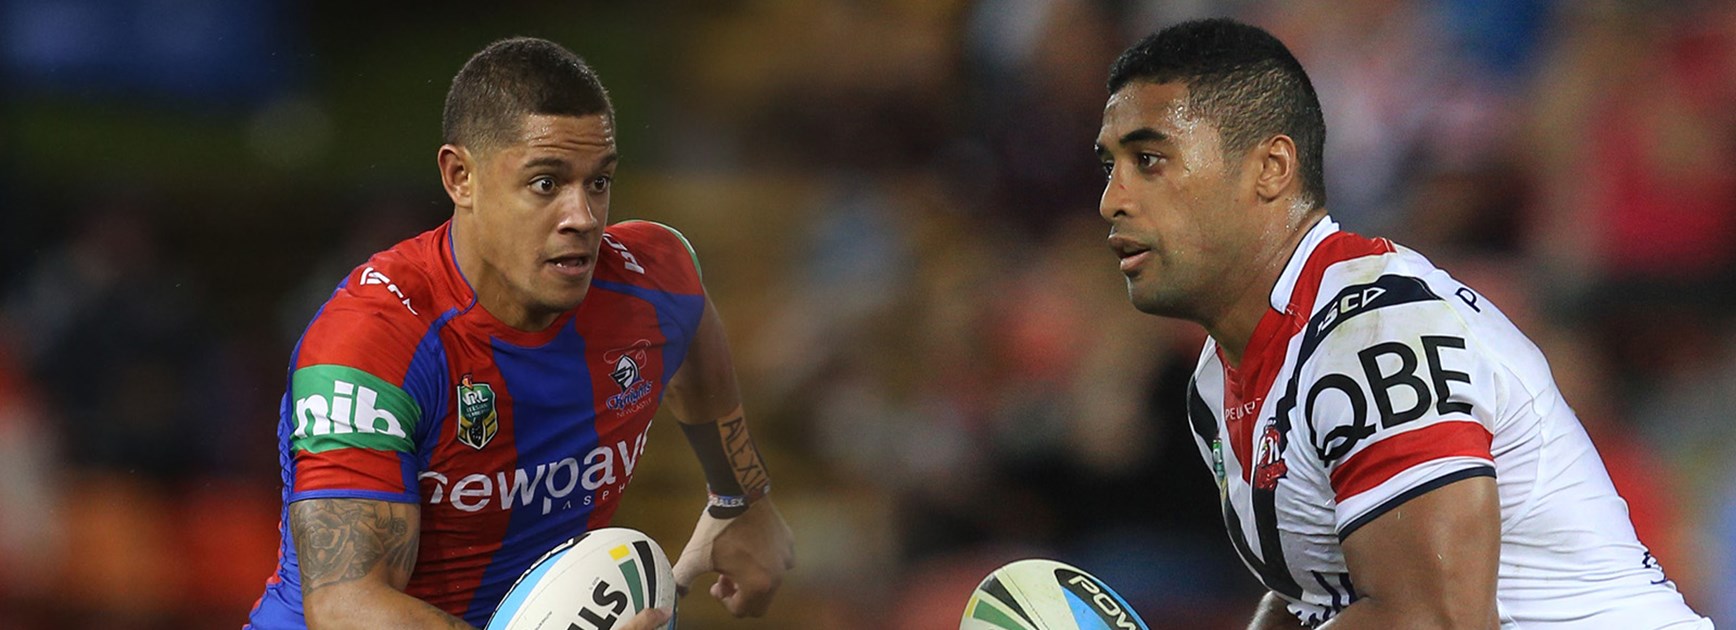 Dane Gagai and Michael Jennings will be looking to add to their try tallies on Sunday afternoon.